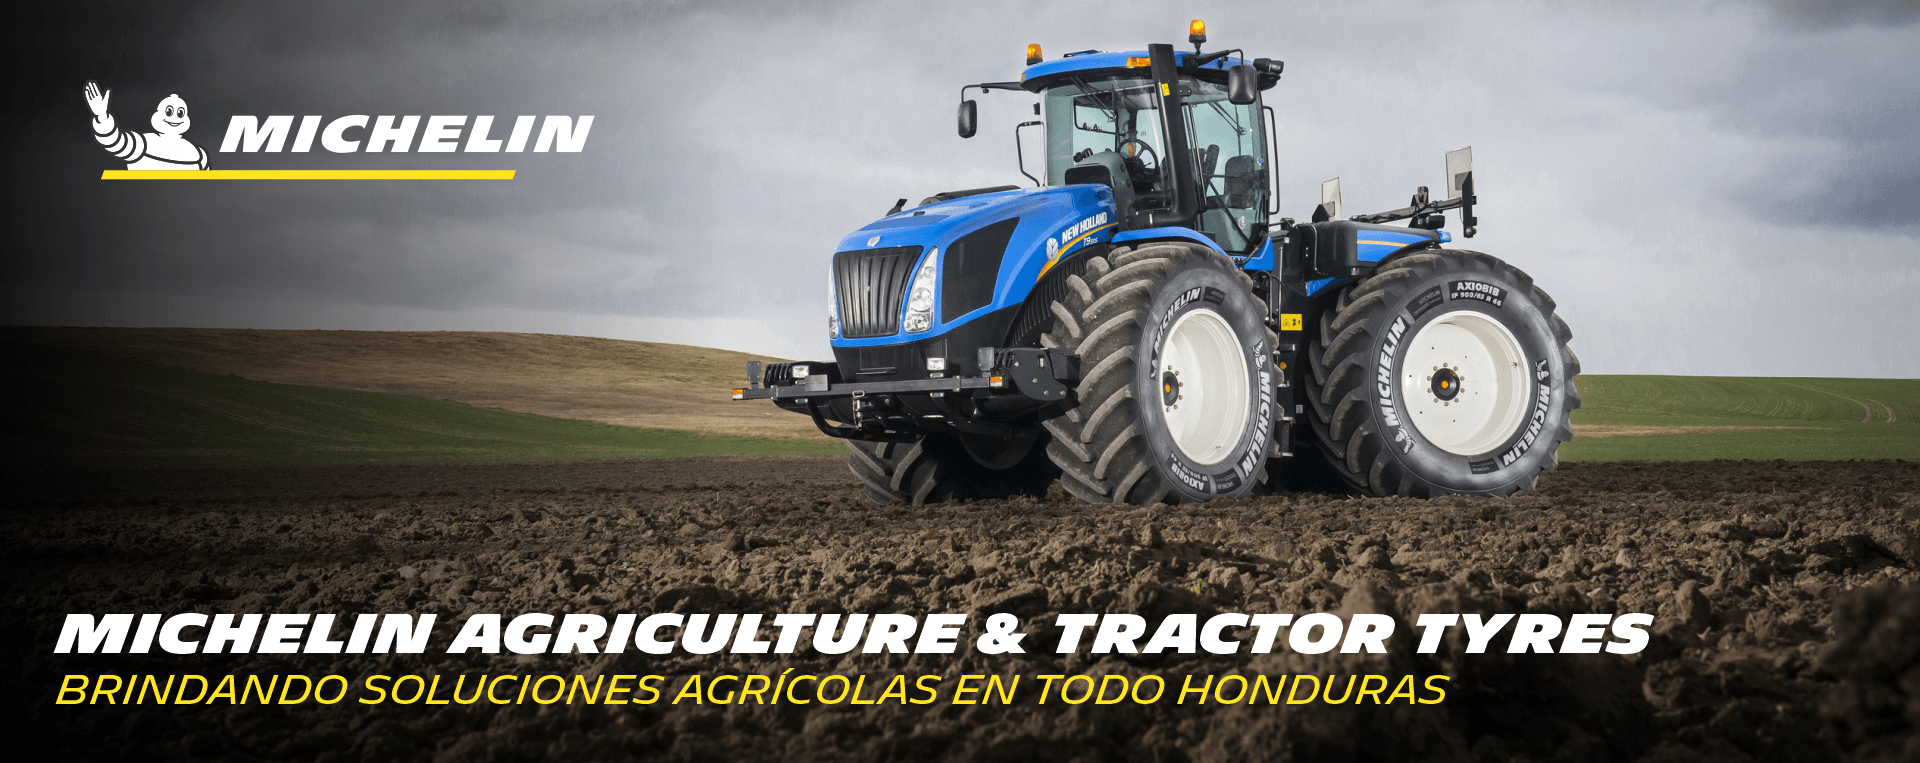 Michelin_Agriculture